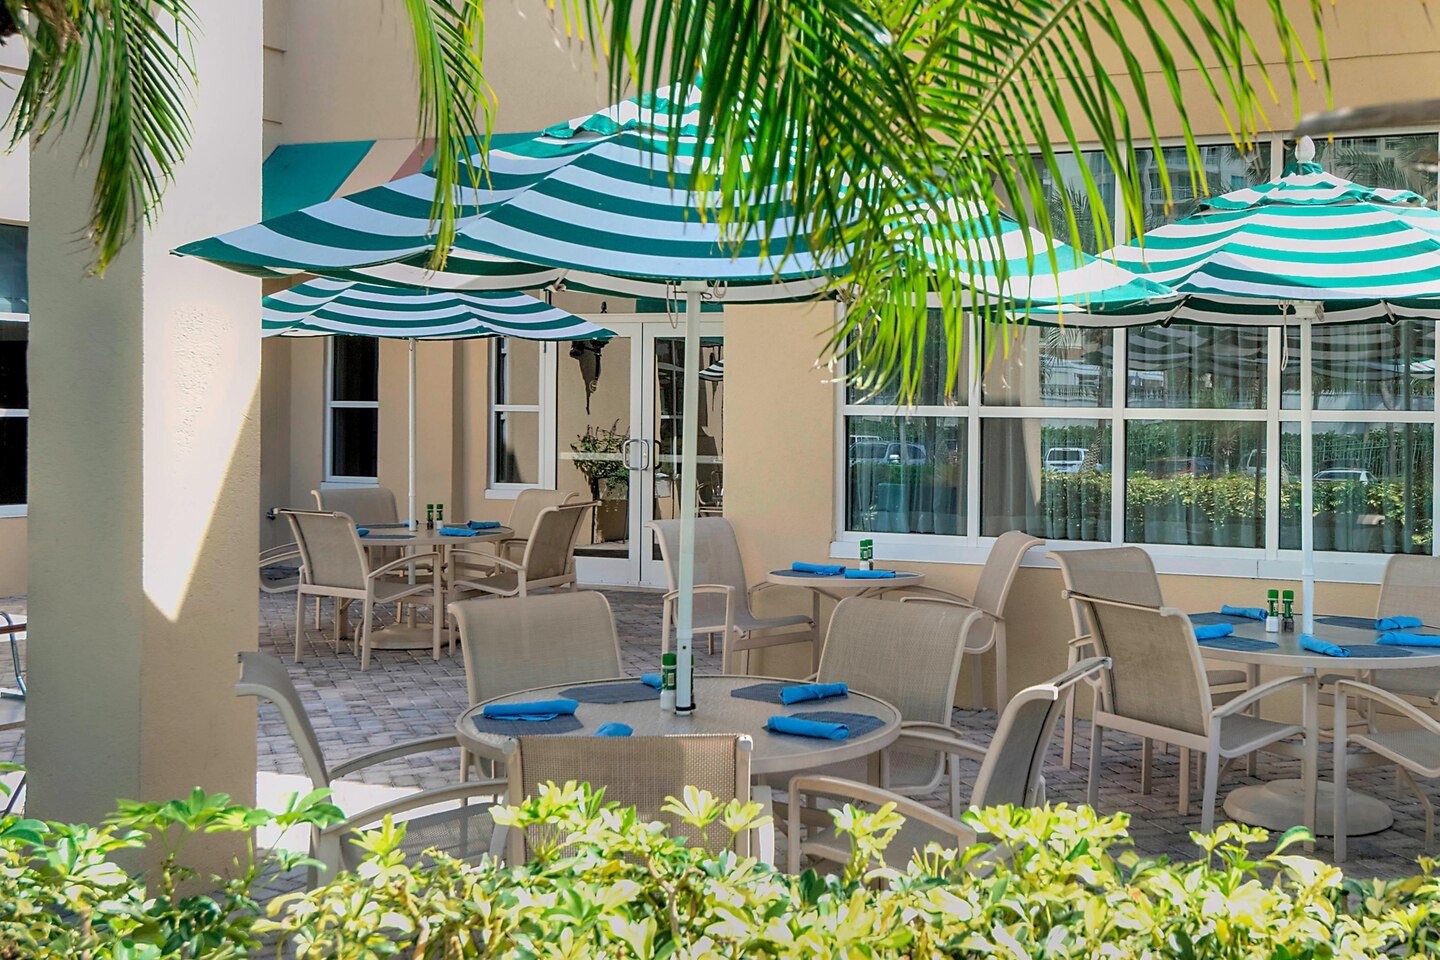 Outdoor tables and chairs with umbrellas for dining